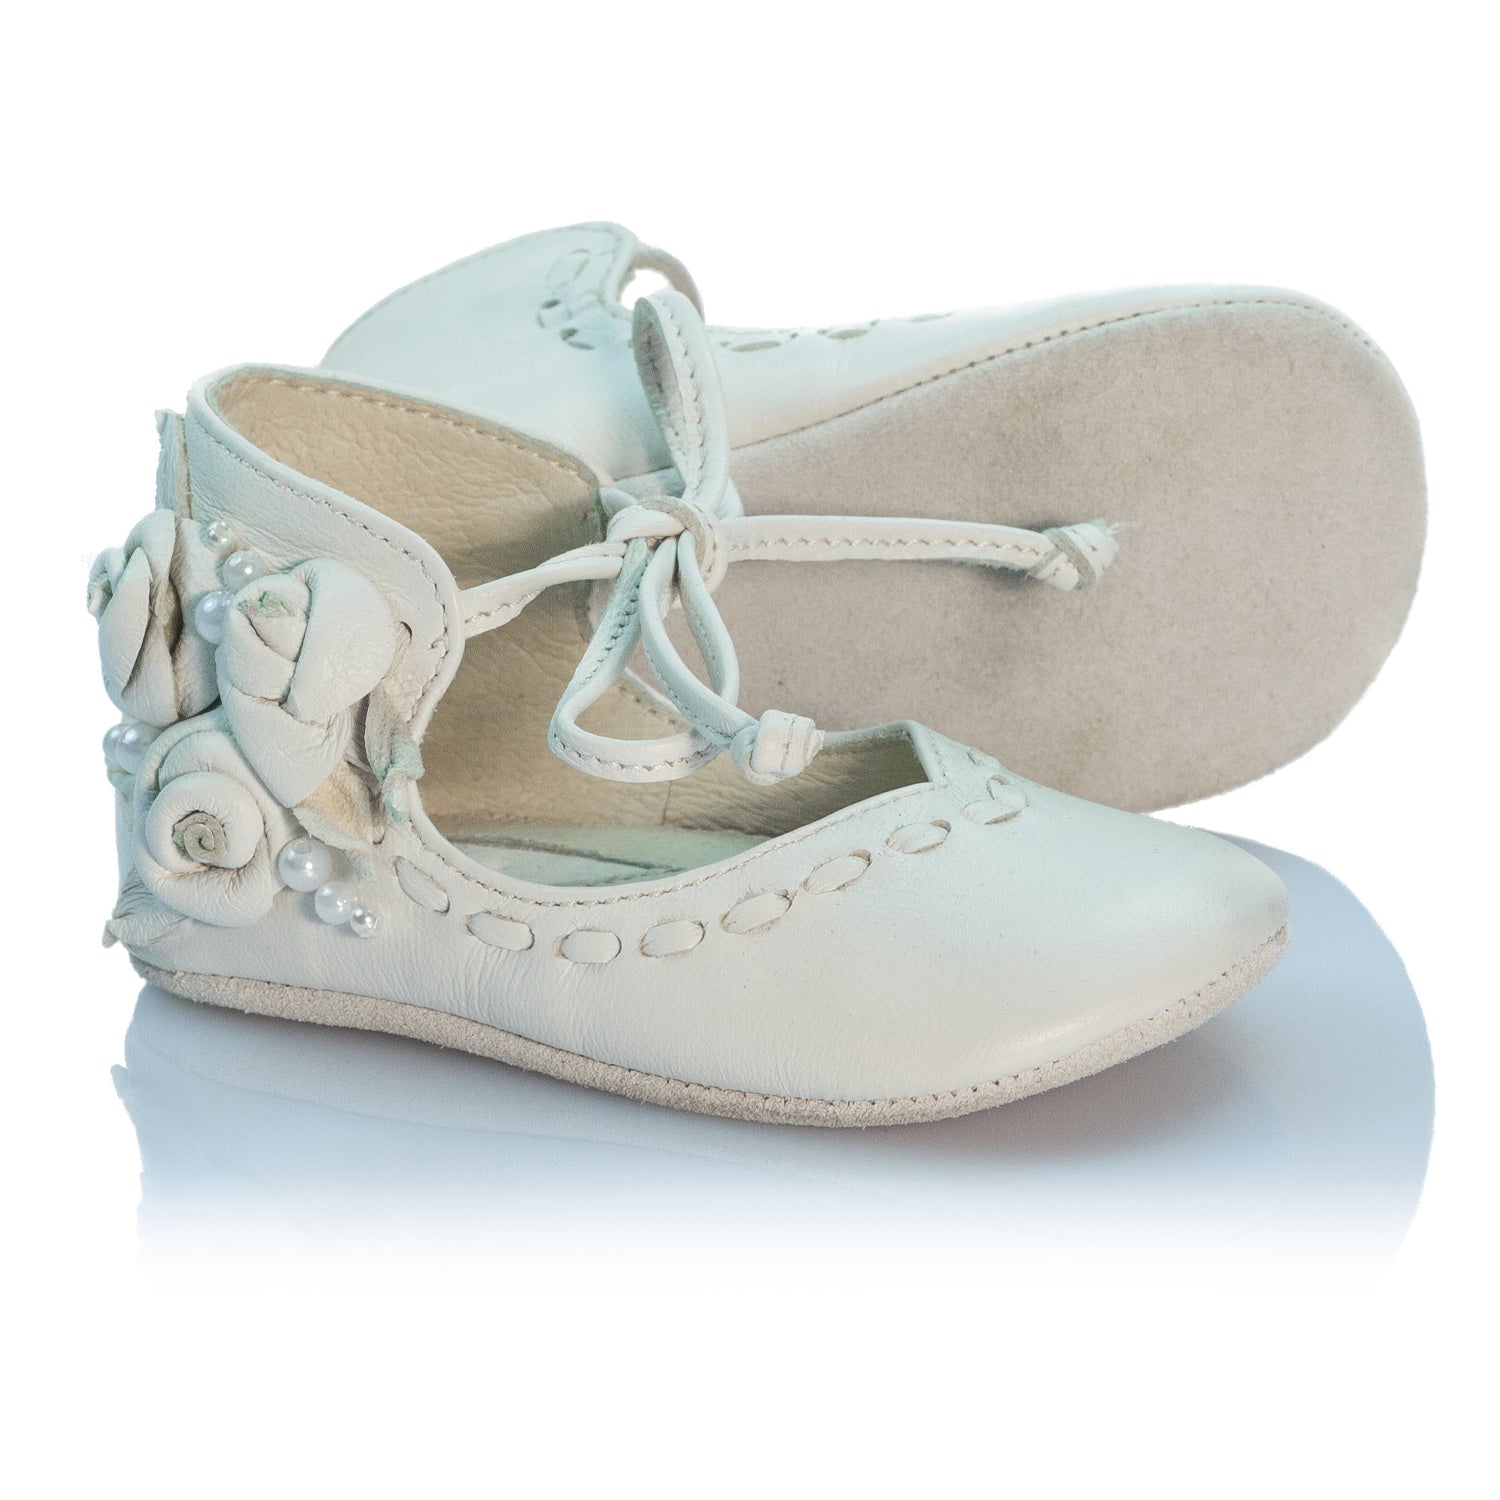 VIBYS Annika handmade ivory white soft leather baby girl shoes with roses and pearls